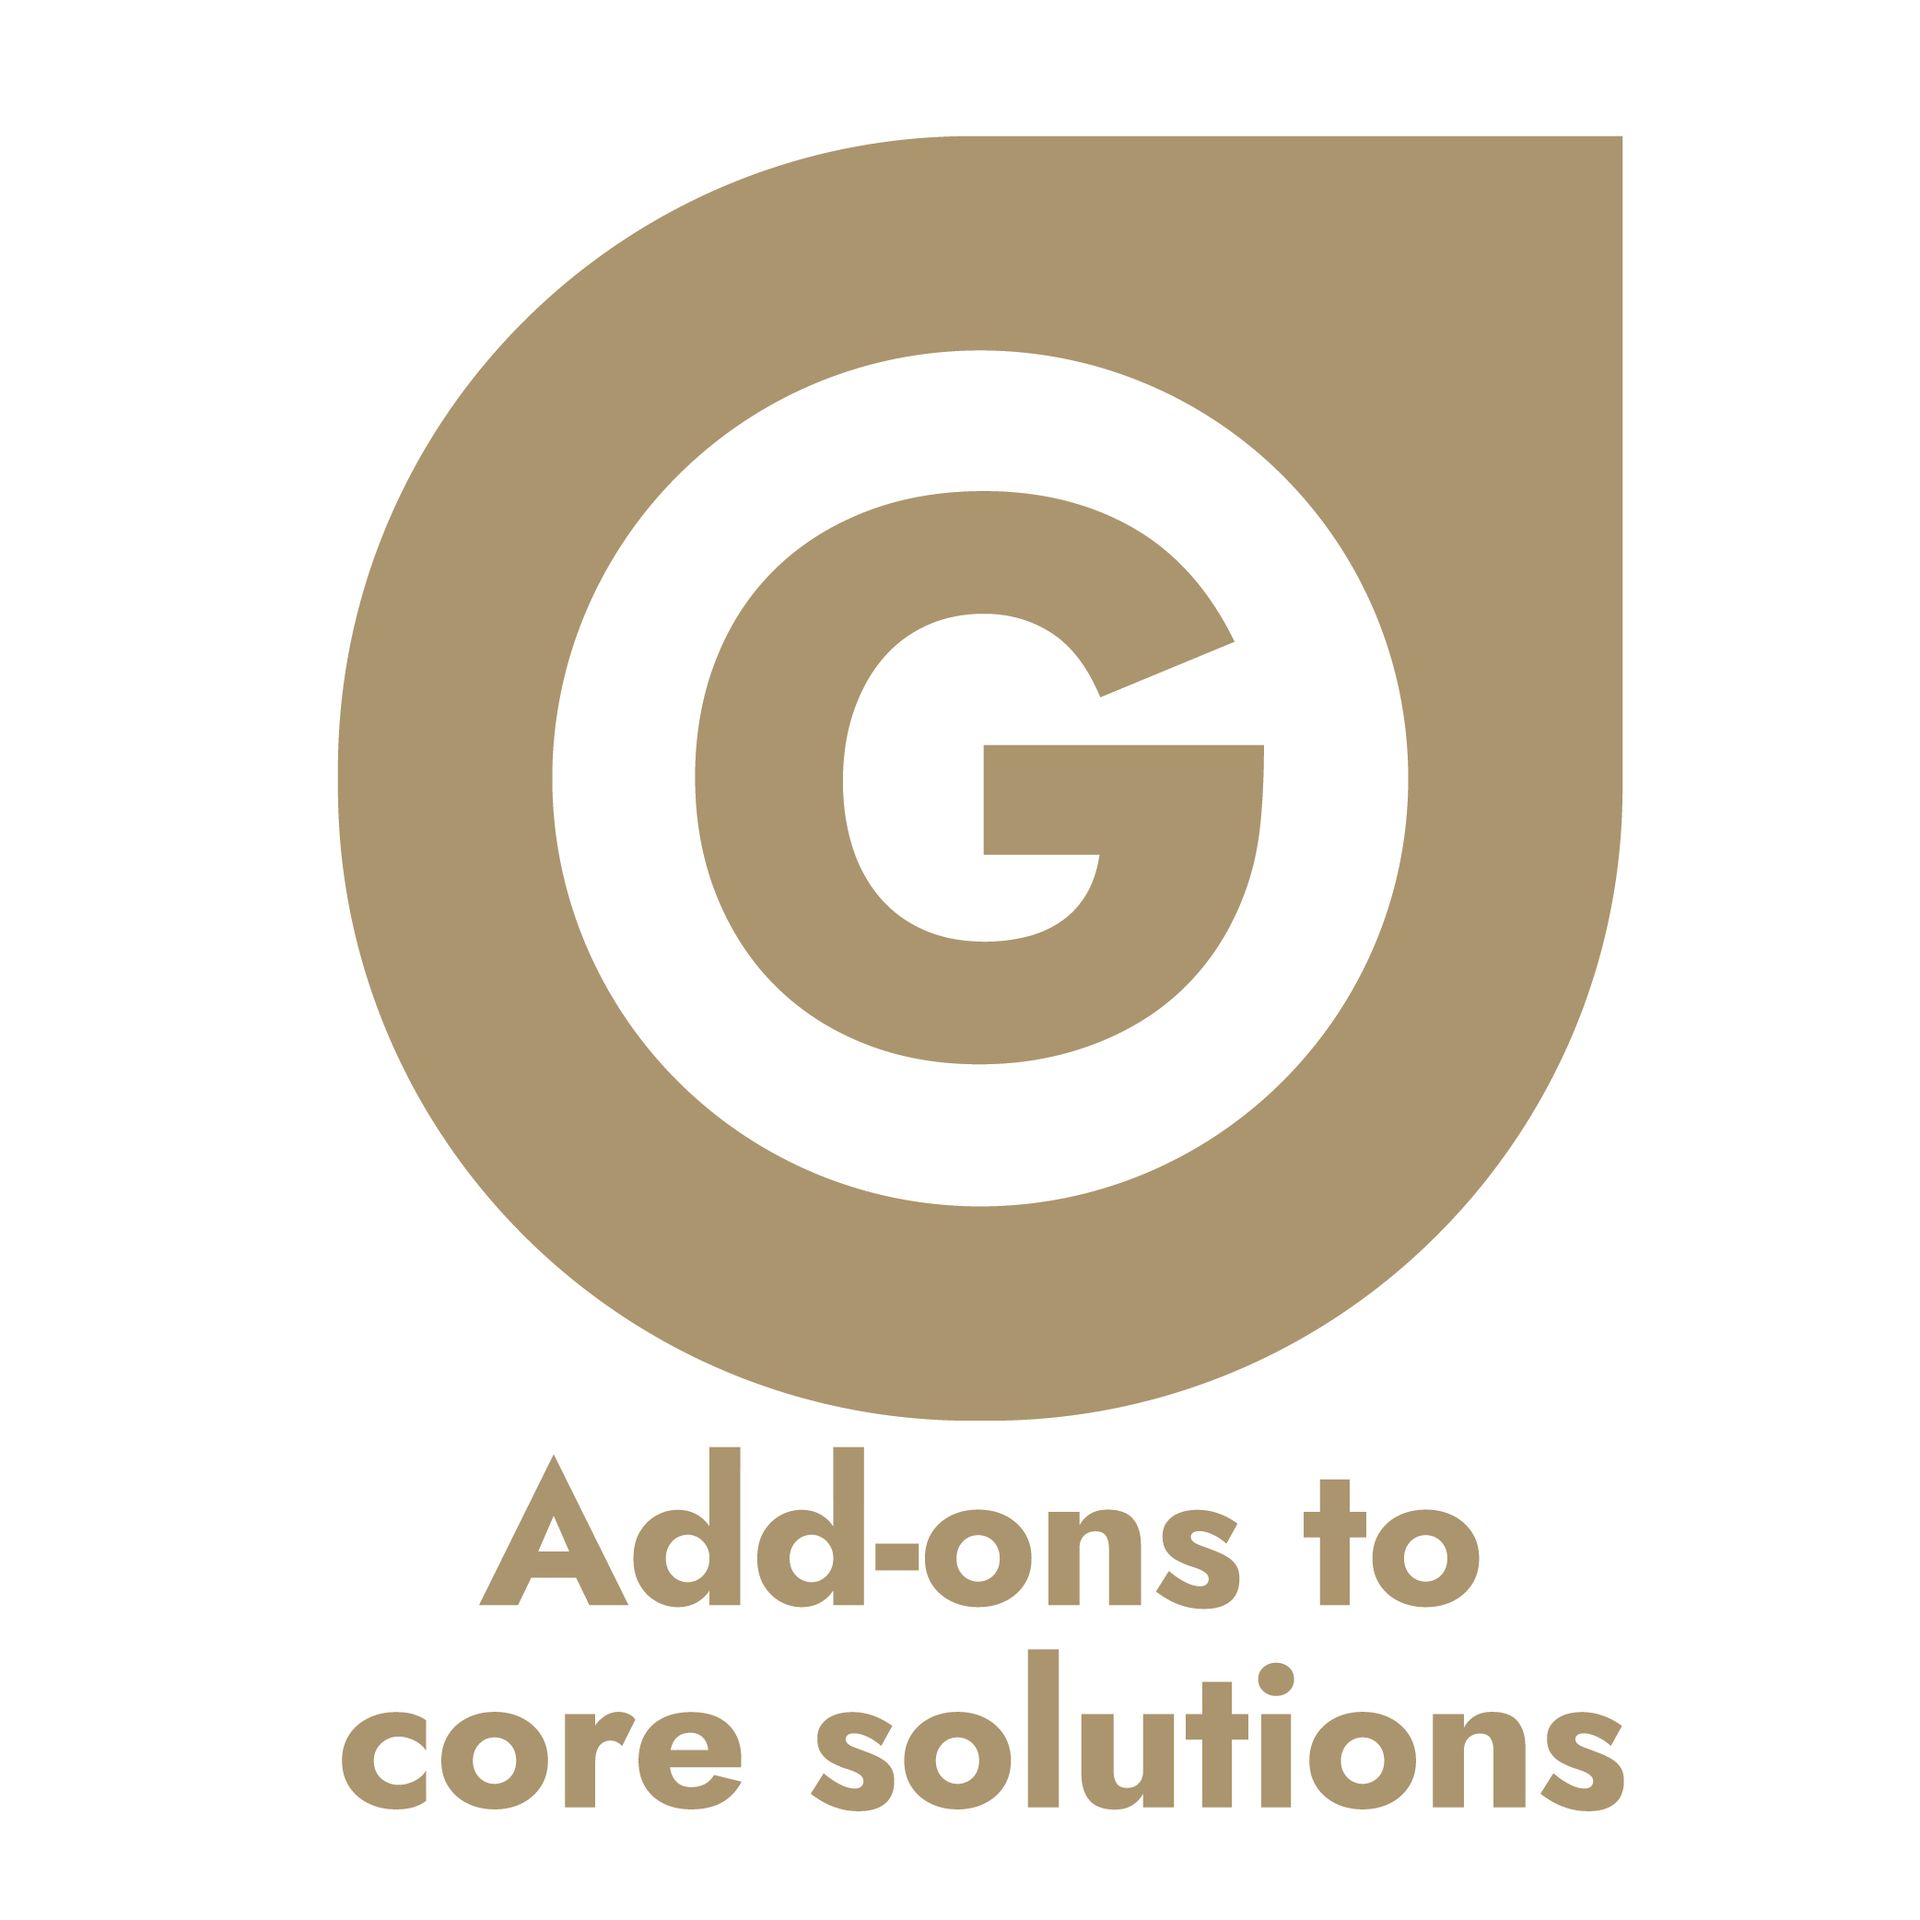 GLOBALG.A.P. Add-ons to core solutions icon over full square white background